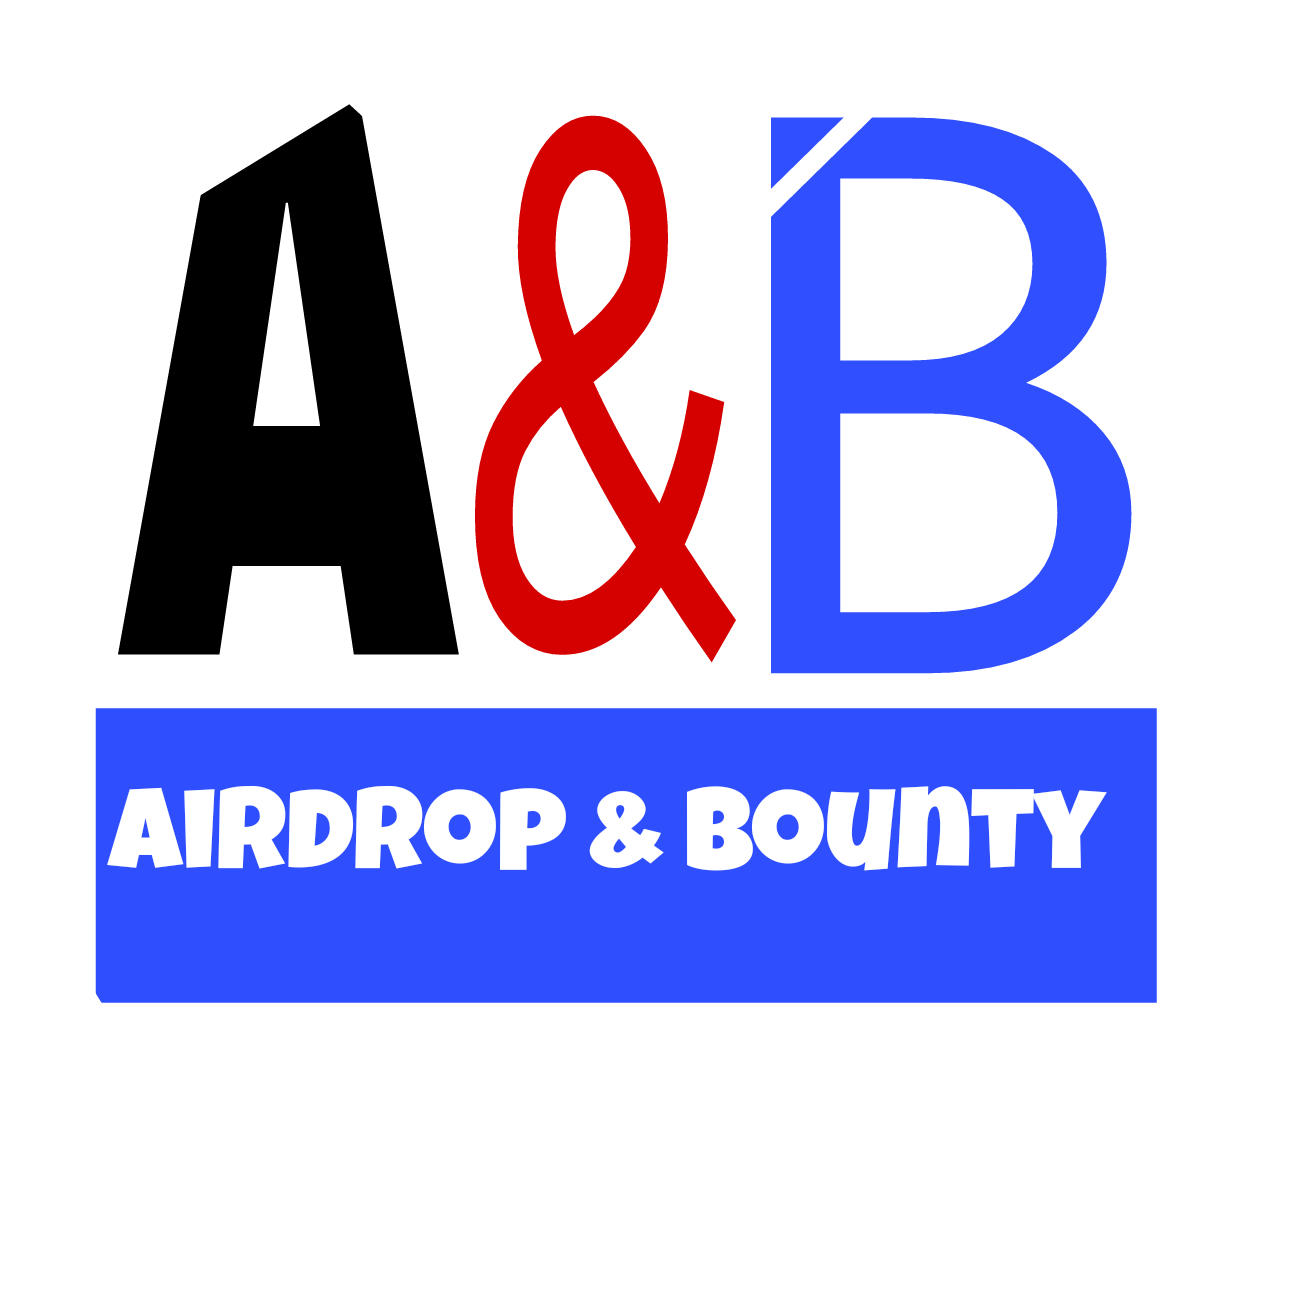 Airdrop & Bounty On Twitter - Airdrop (1307x1311), Png Download